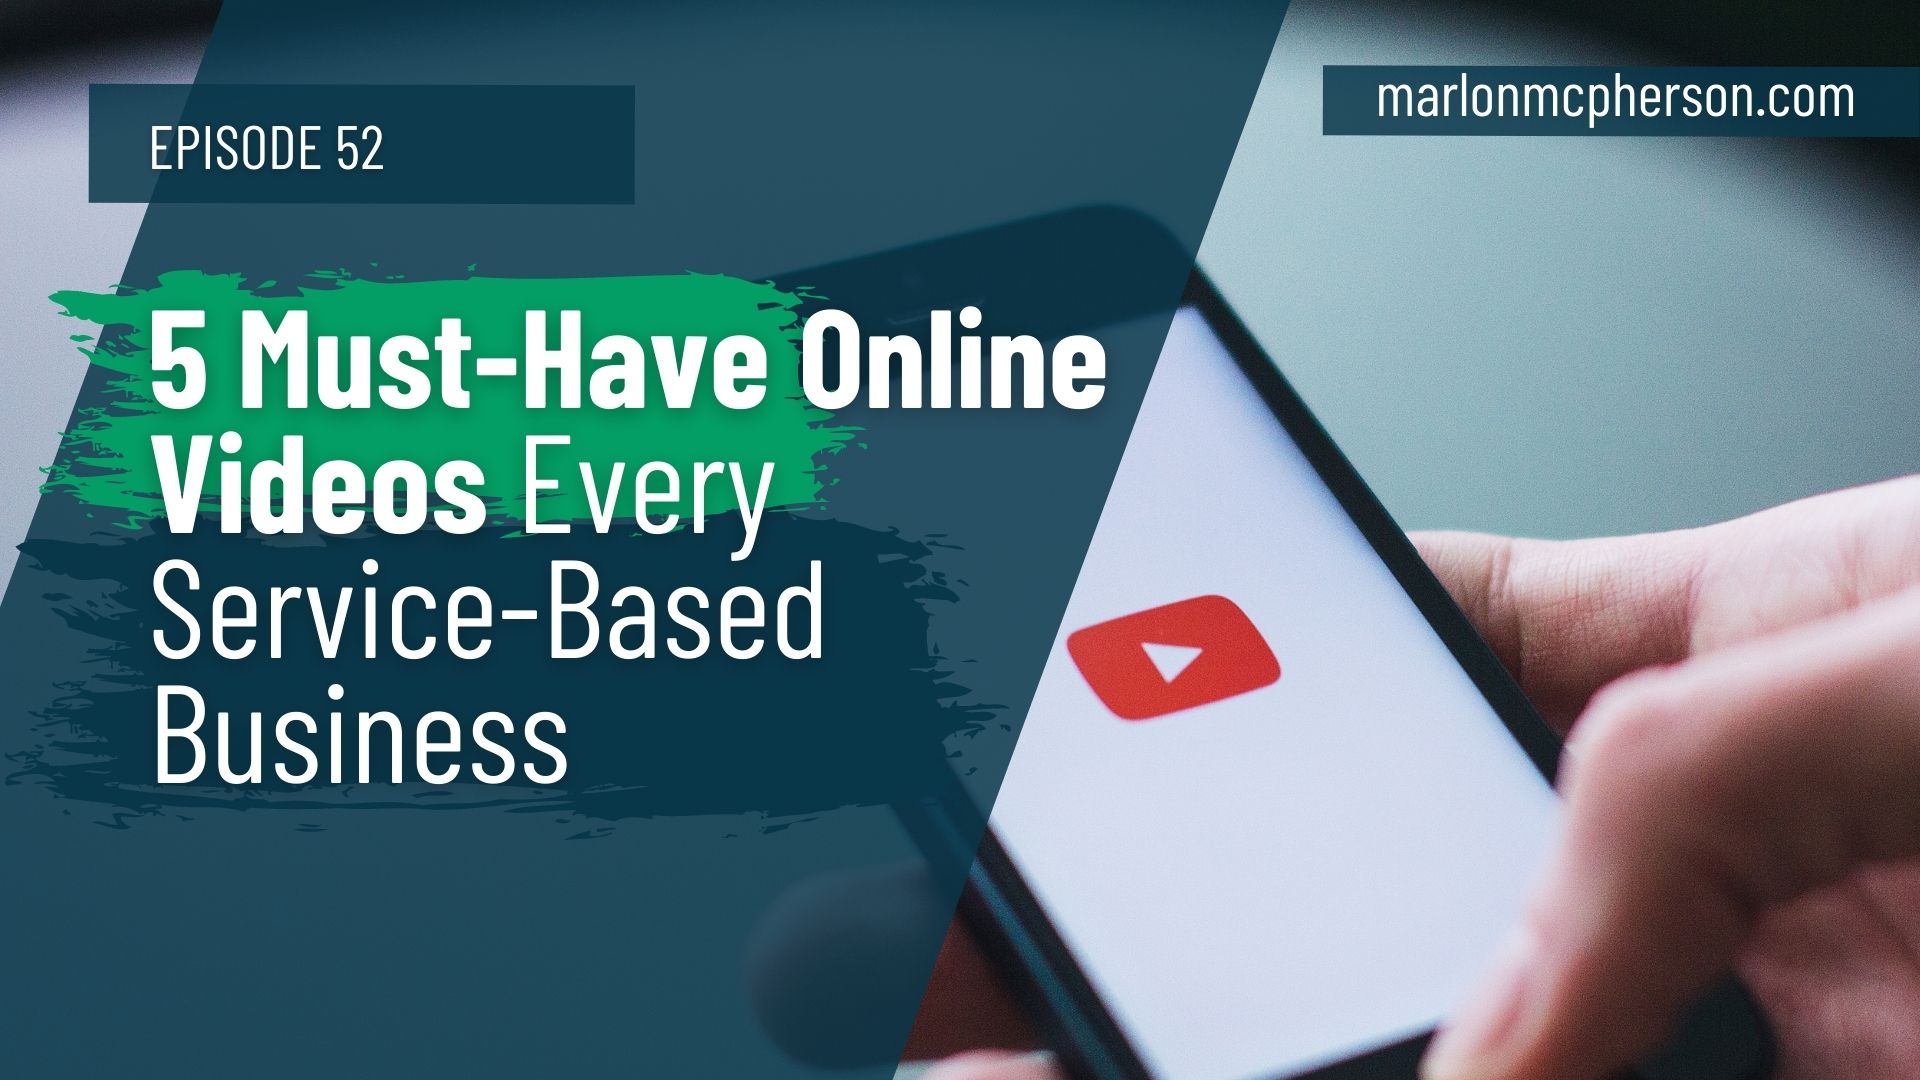 5 Must-Have Online Videos Every Service-Based Business